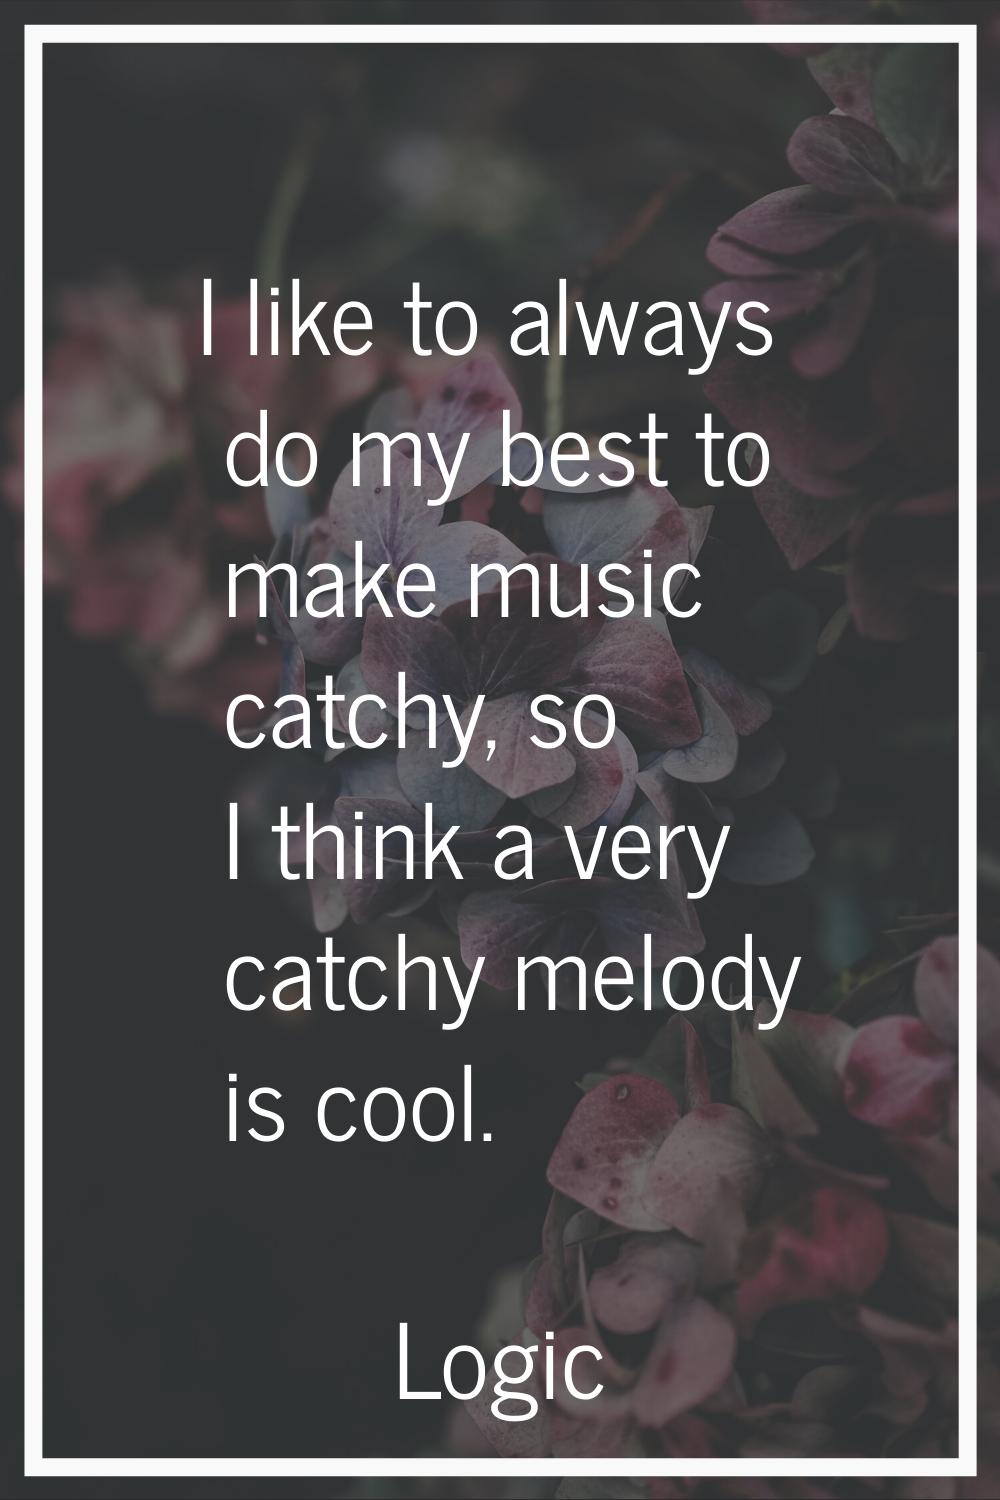 I like to always do my best to make music catchy, so I think a very catchy melody is cool.